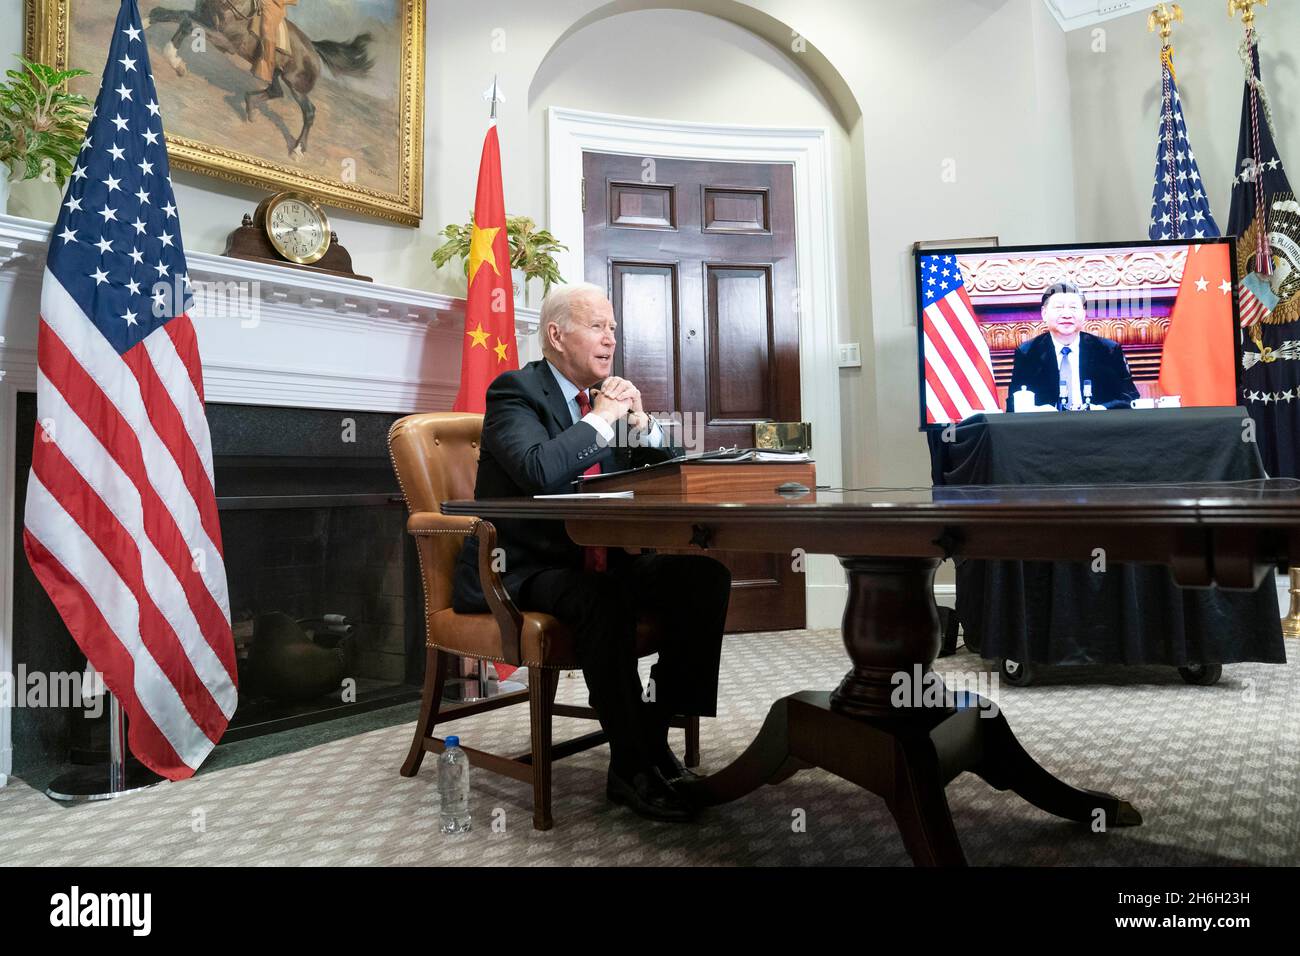 Washington, United States. 15th Nov, 2021. President Joe Biden speaks during a virtual summit with Chinese President Xi Jinping in the Roosevelt Room of the White House in Washington DC on Monday, November 15, 2021. Photo by Sarah Silbiger/Pool/Sipa USA Credit: Sipa USA/Alamy Live News Stock Photo